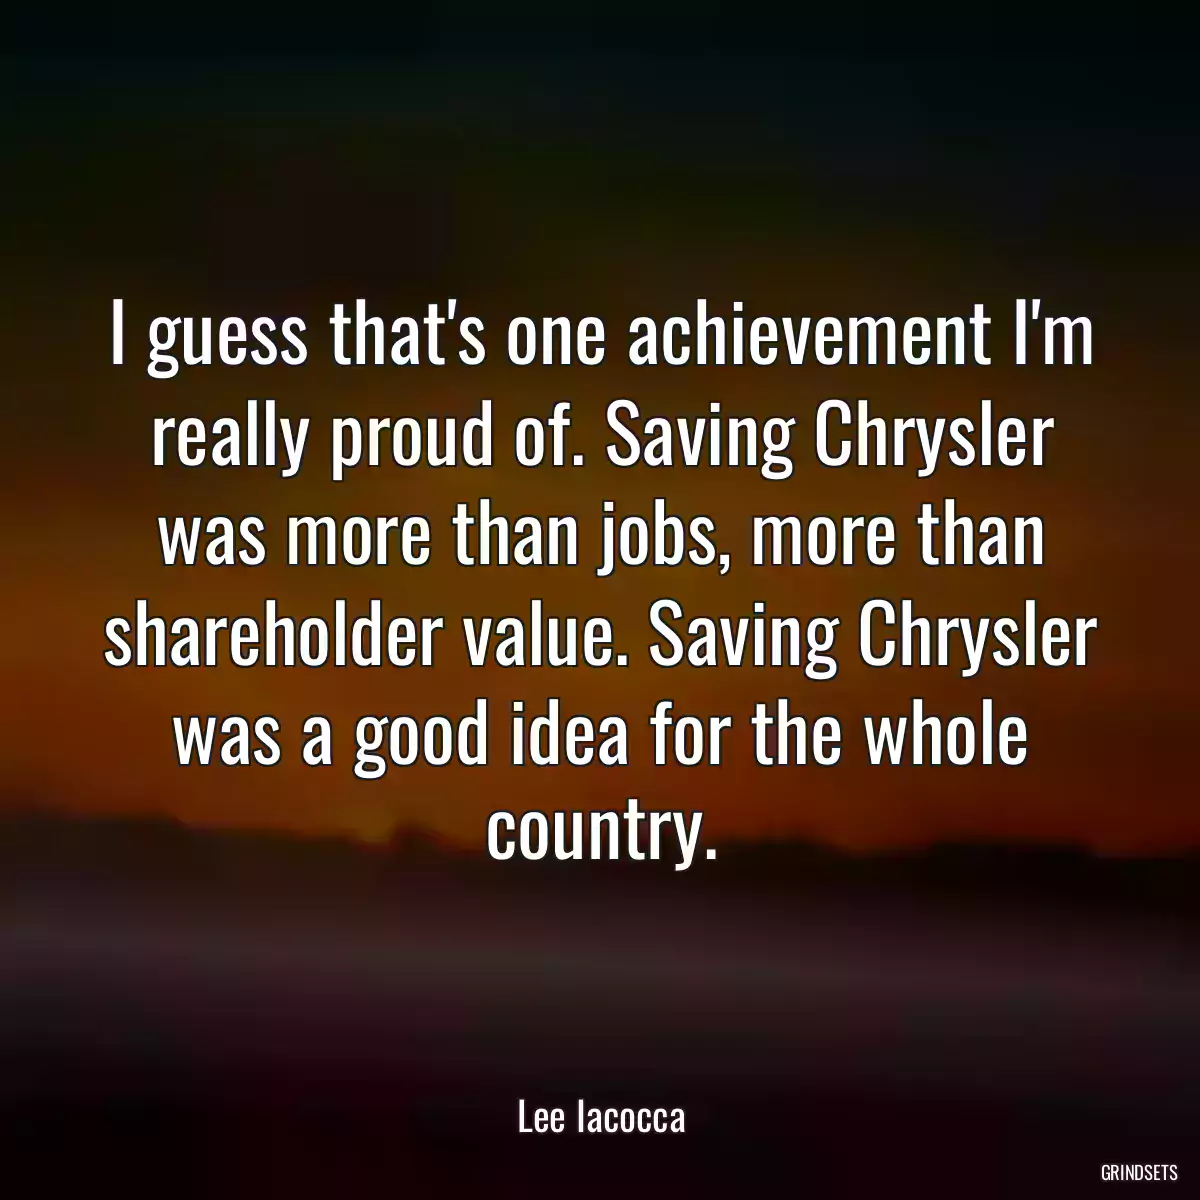 I guess that\'s one achievement I\'m really proud of. Saving Chrysler was more than jobs, more than shareholder value. Saving Chrysler was a good idea for the whole country.